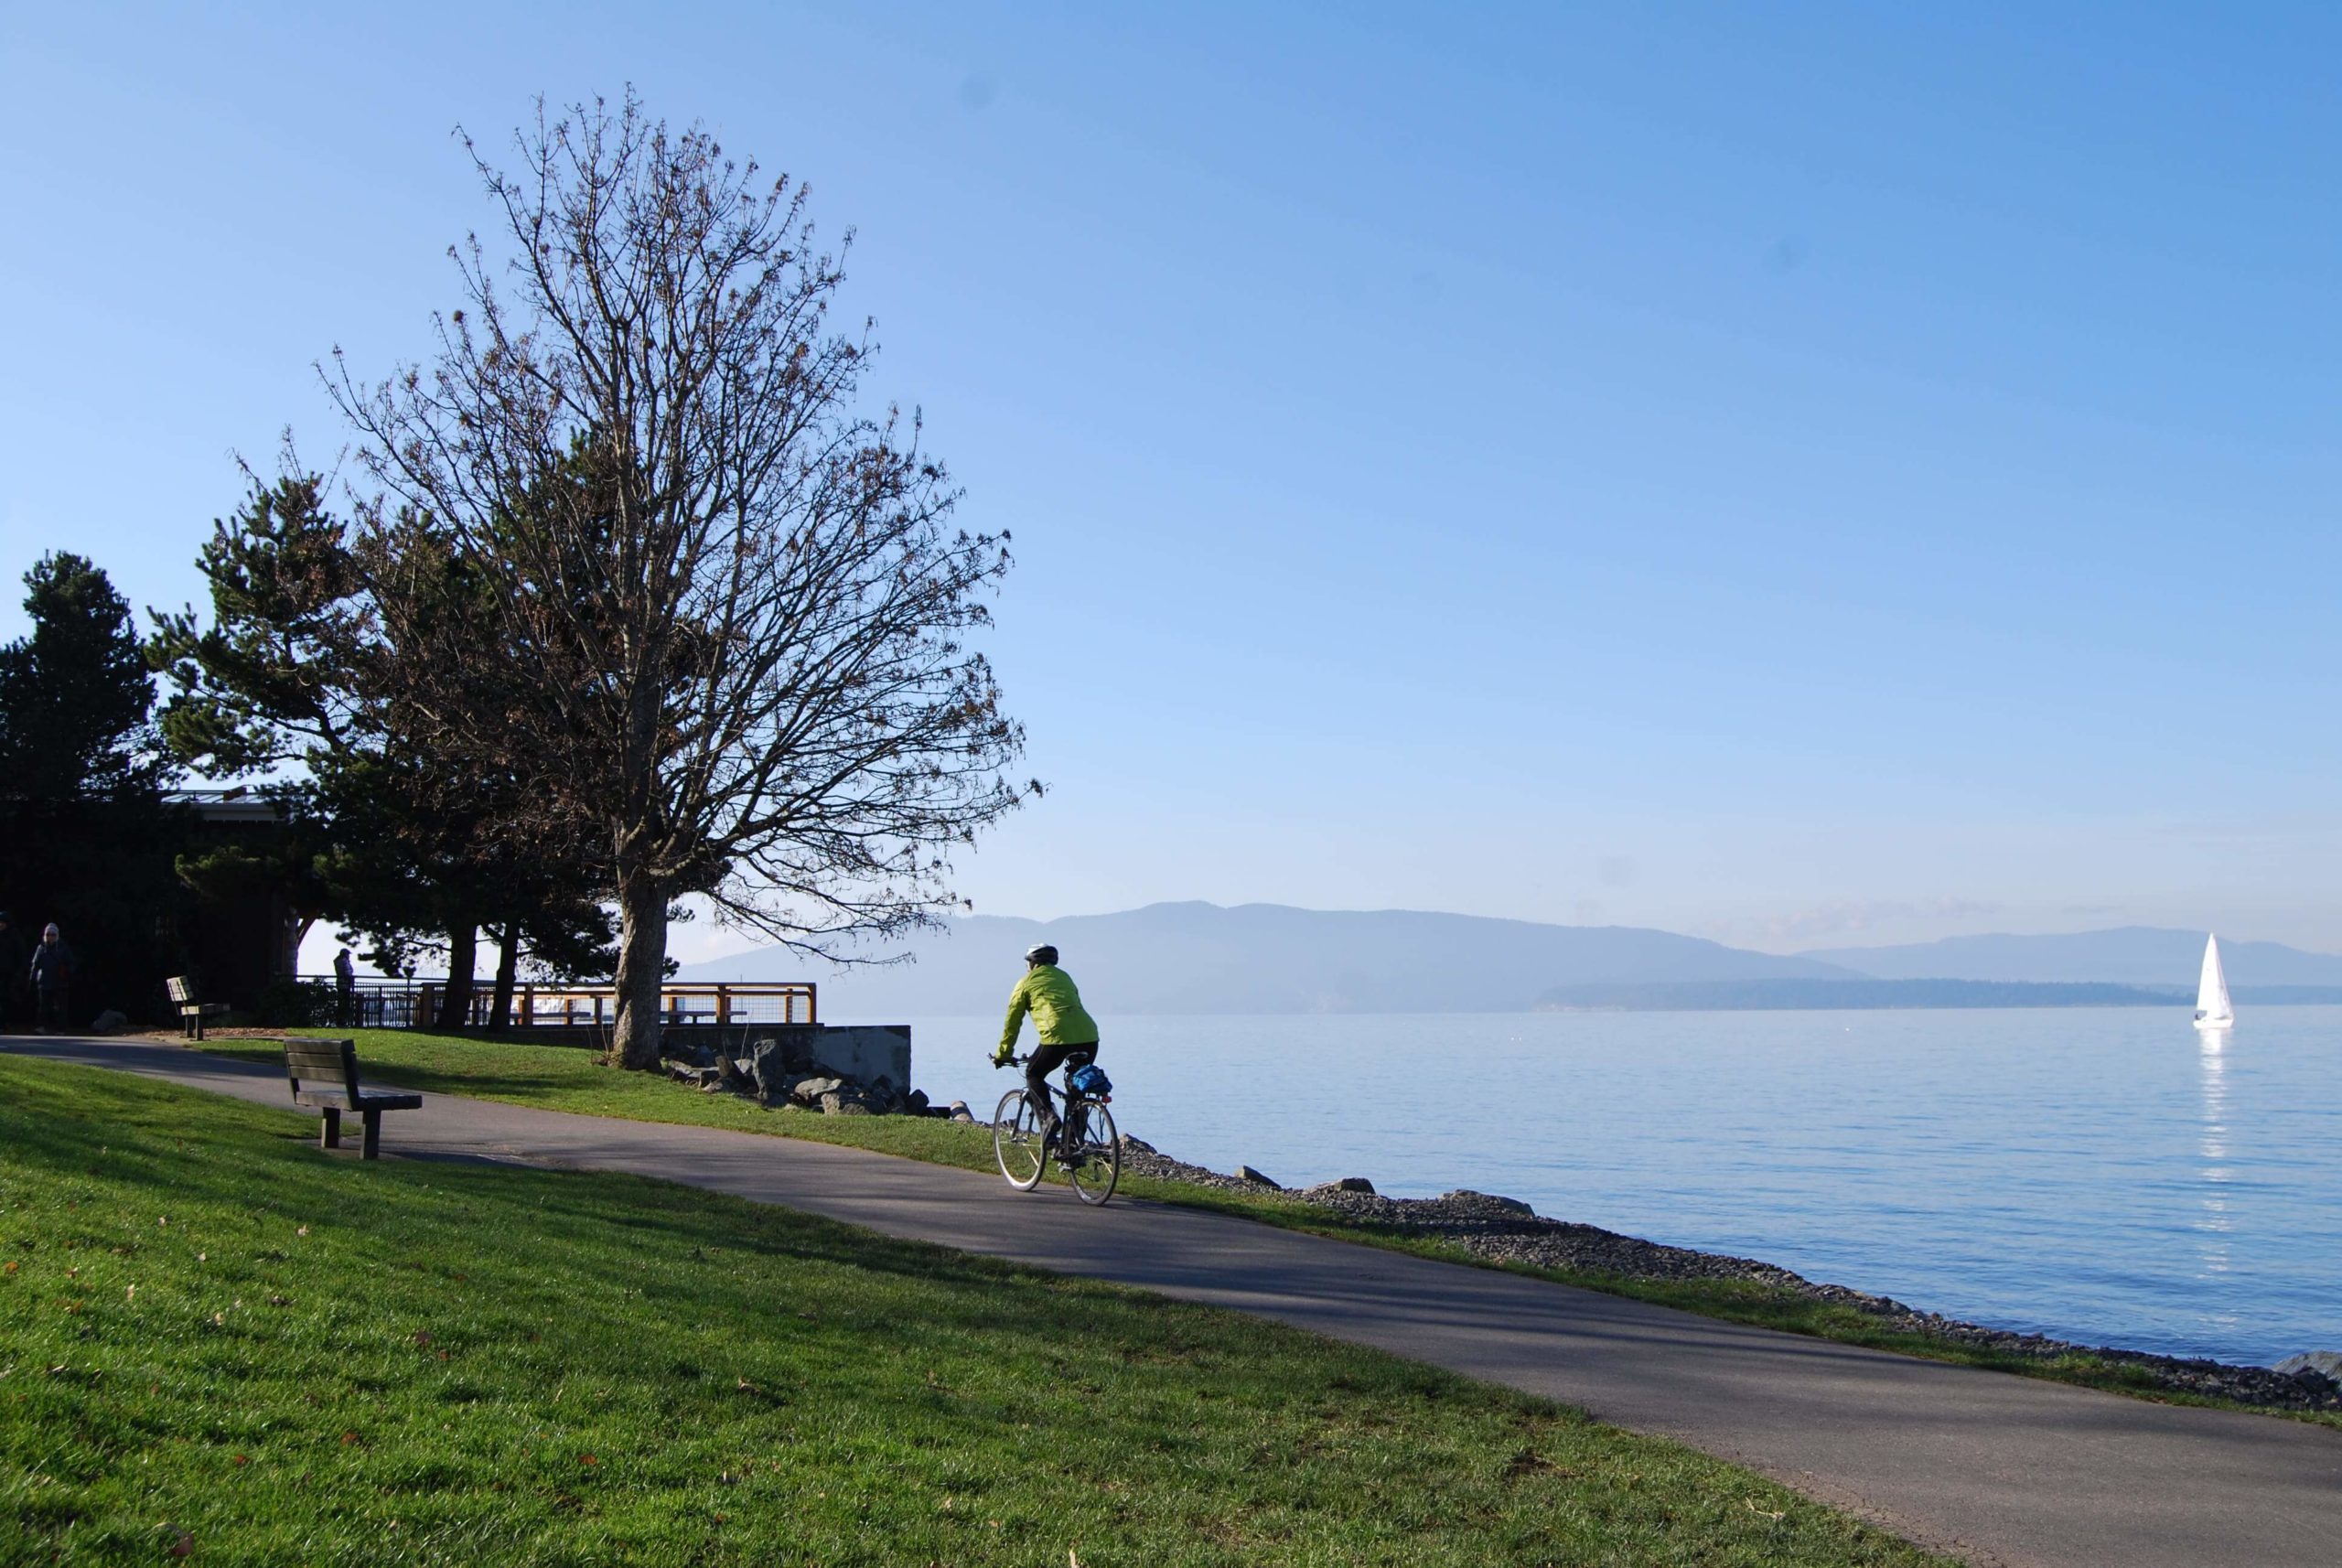 A biker rides along a path near the ocean, with a lawn and tall bare tree